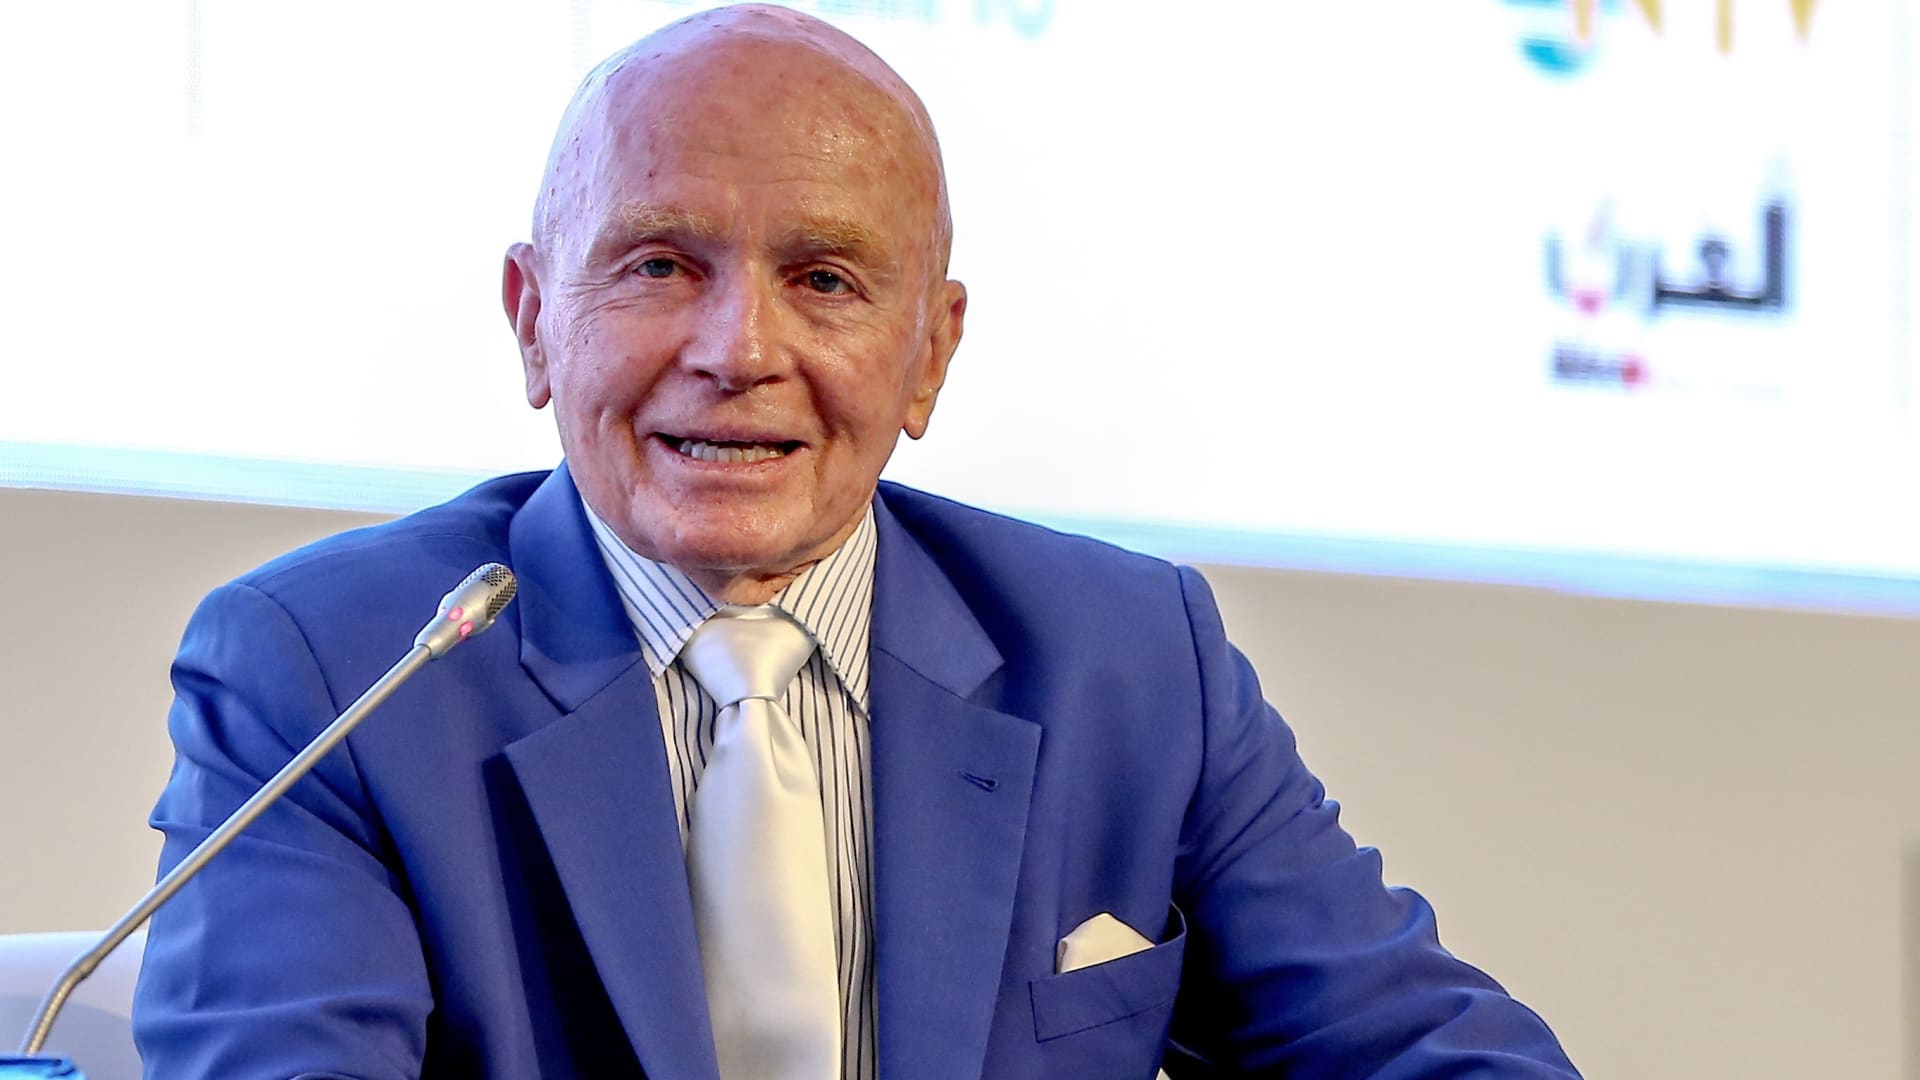 Mark Mobius shares tips on how investors can jump on India's 'incredible growth opportunity'